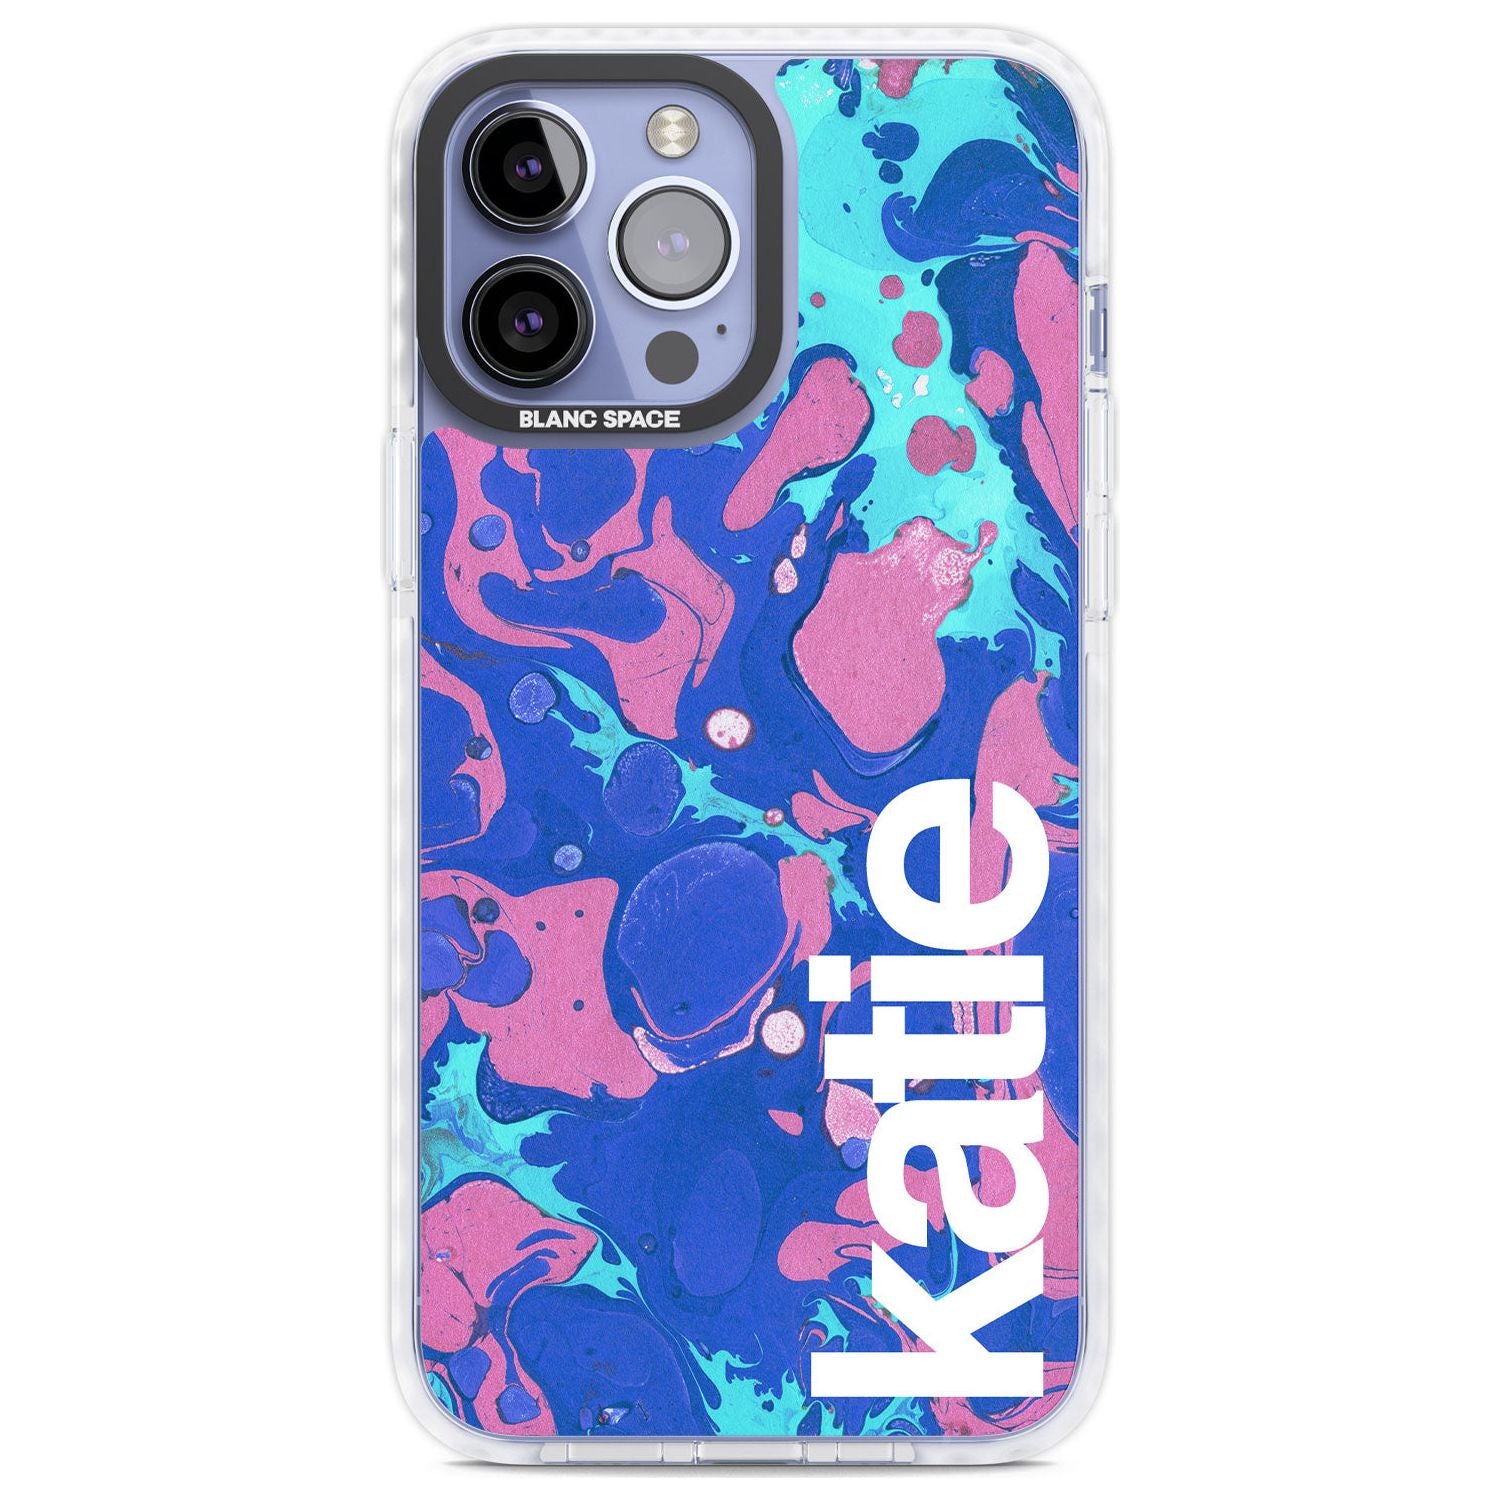 Personalised Navy, Turquoise + Purple - Marbled Custom Phone Case iPhone 13 Pro Max / Impact Case,iPhone 14 Pro Max / Impact Case Blanc Space